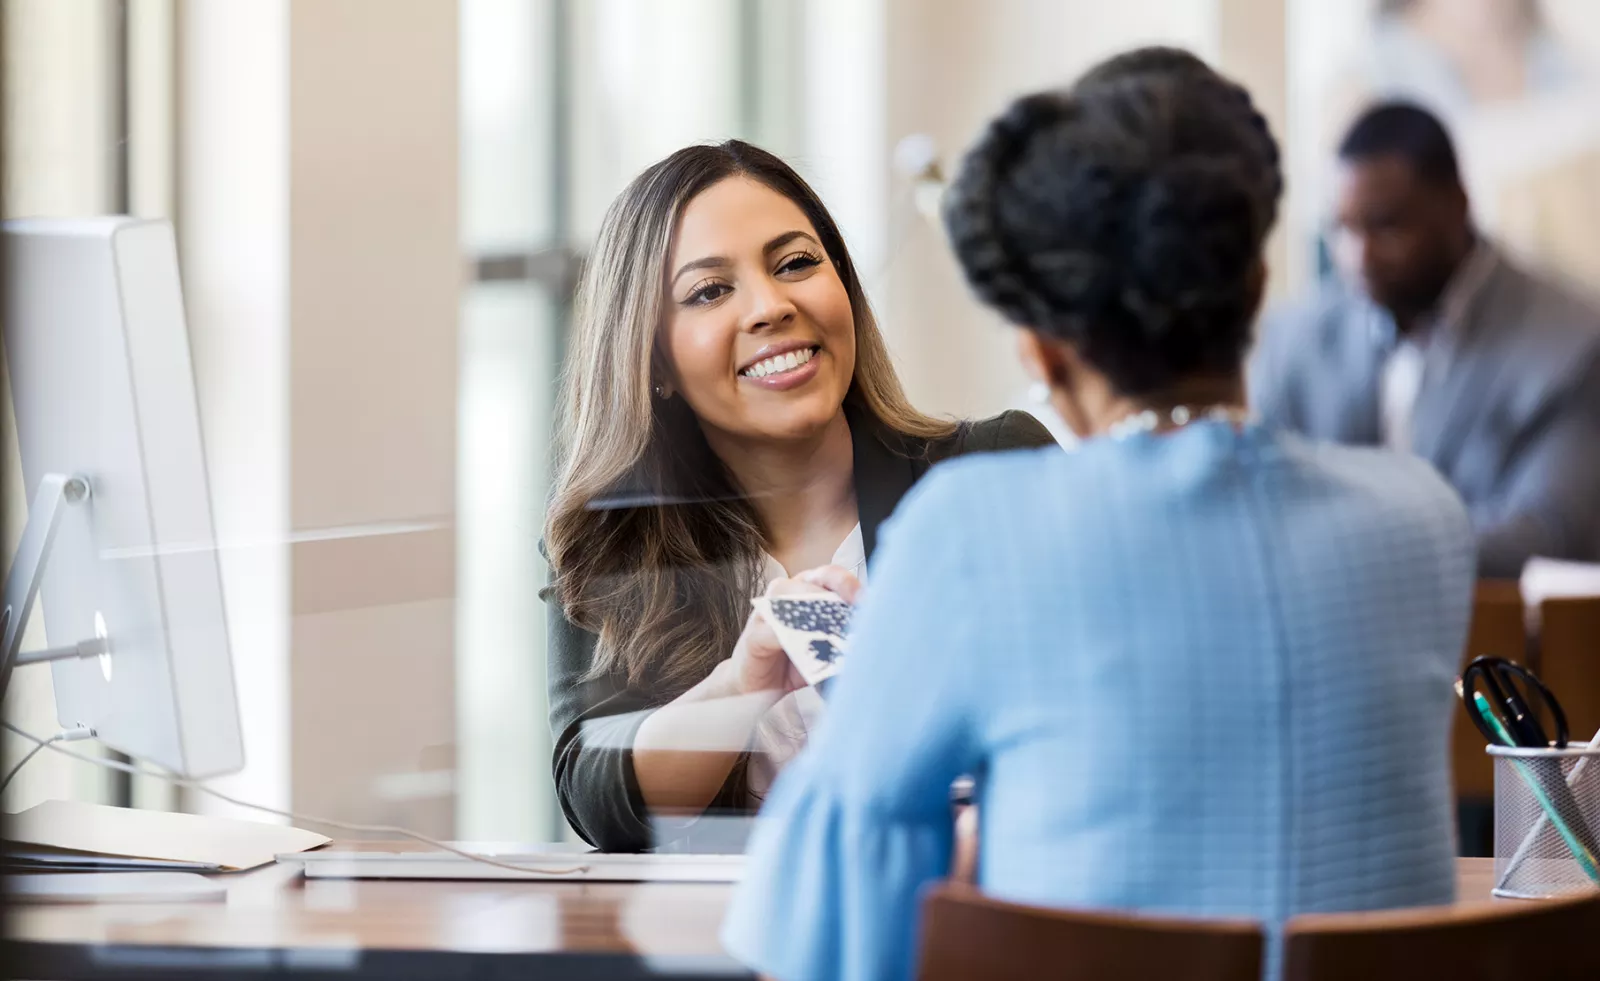  An Edward Jones financial advisor has an initial conversation with a client in an effort to understand her needs and values.
